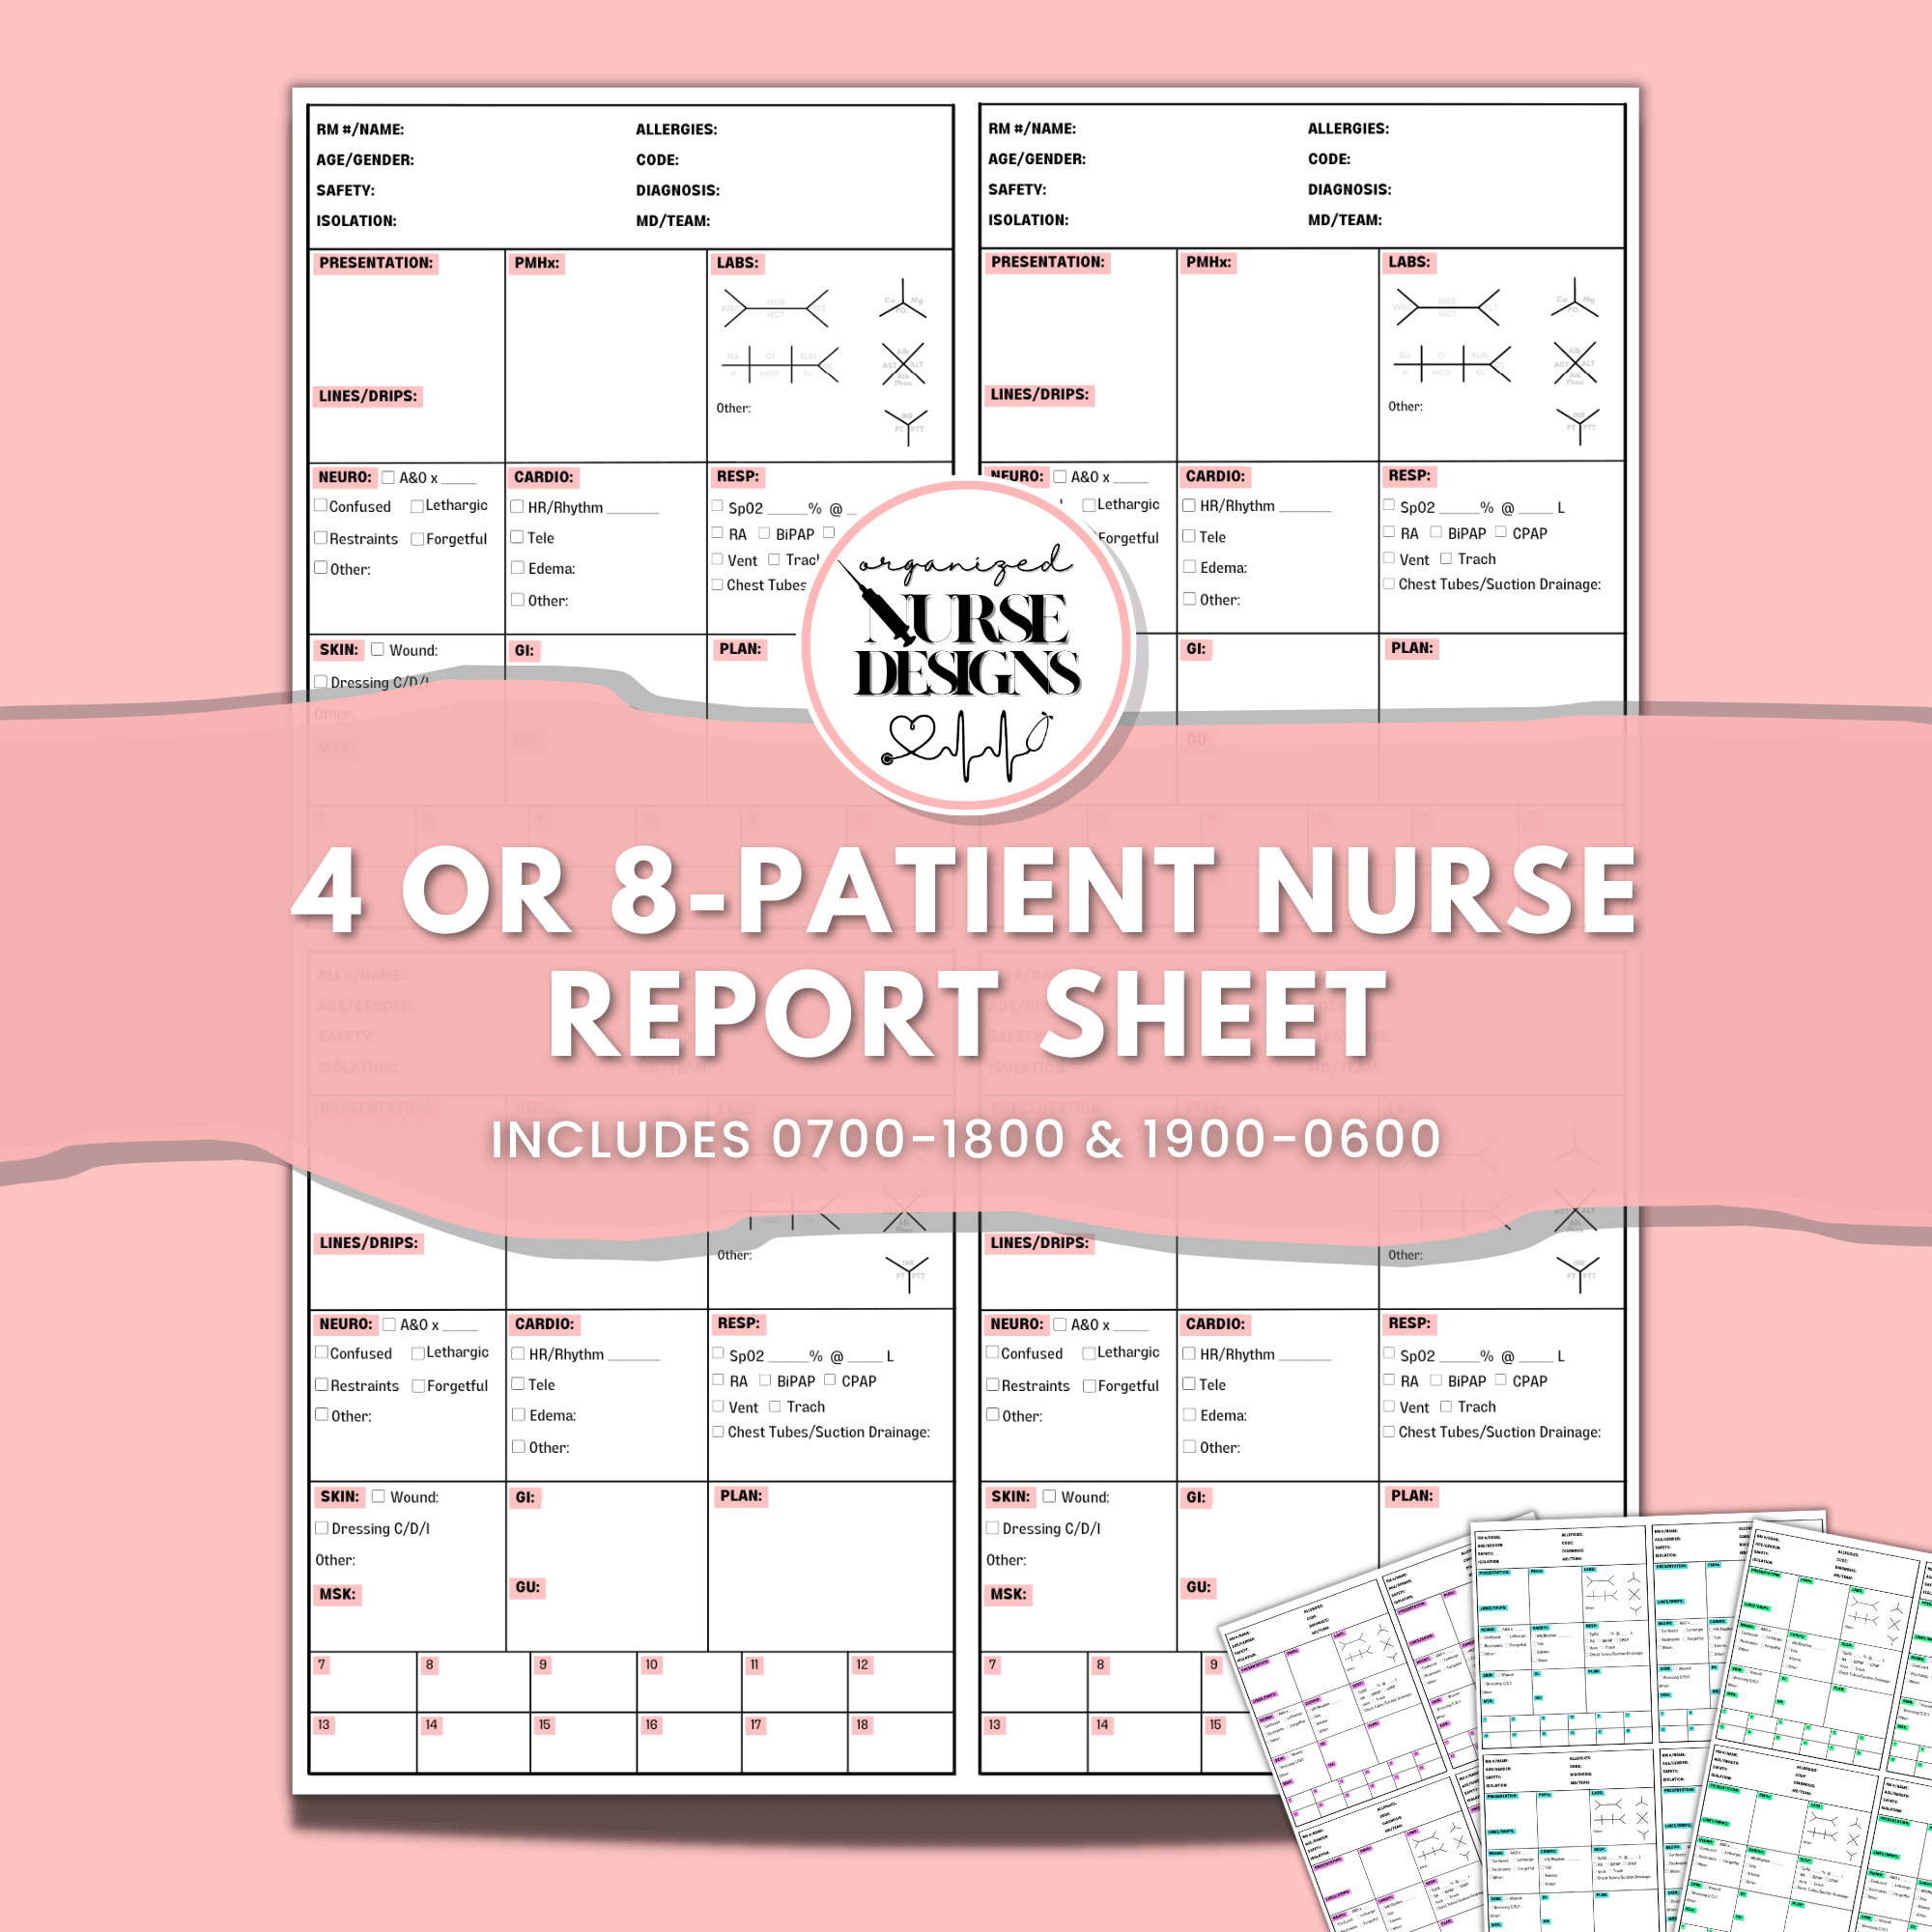 4 or 8-Patient Nurse Report Sheet with Medication Schedule for Nursing Students by OrganizedNurseDesigns